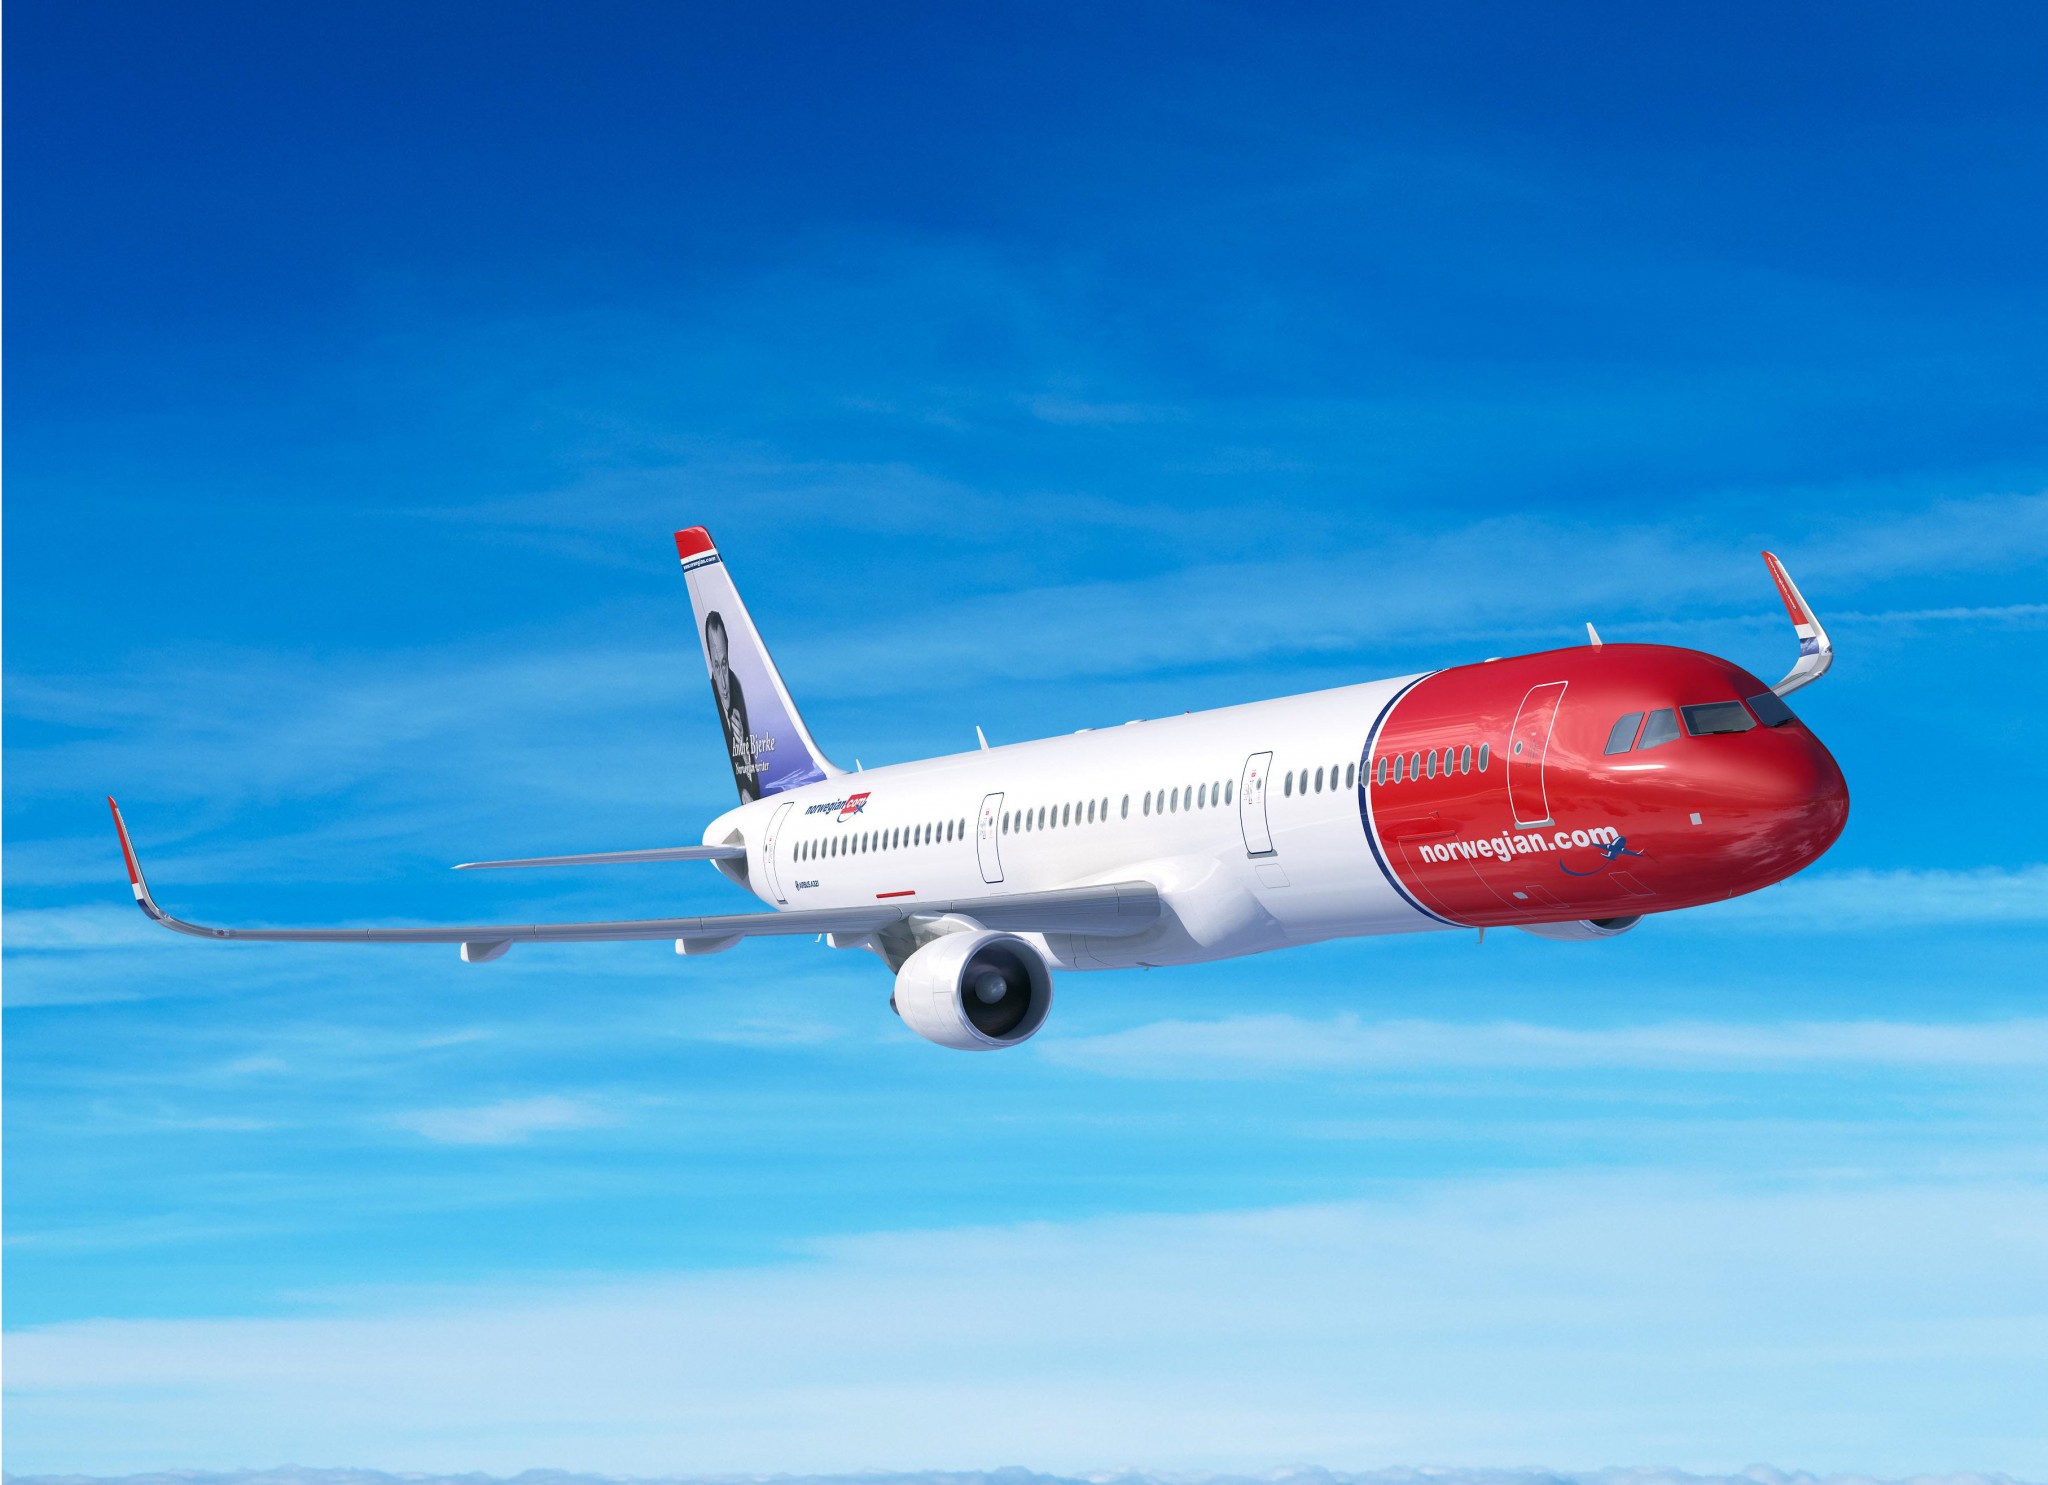 Norwegian announces new routes to Chicago and Austin